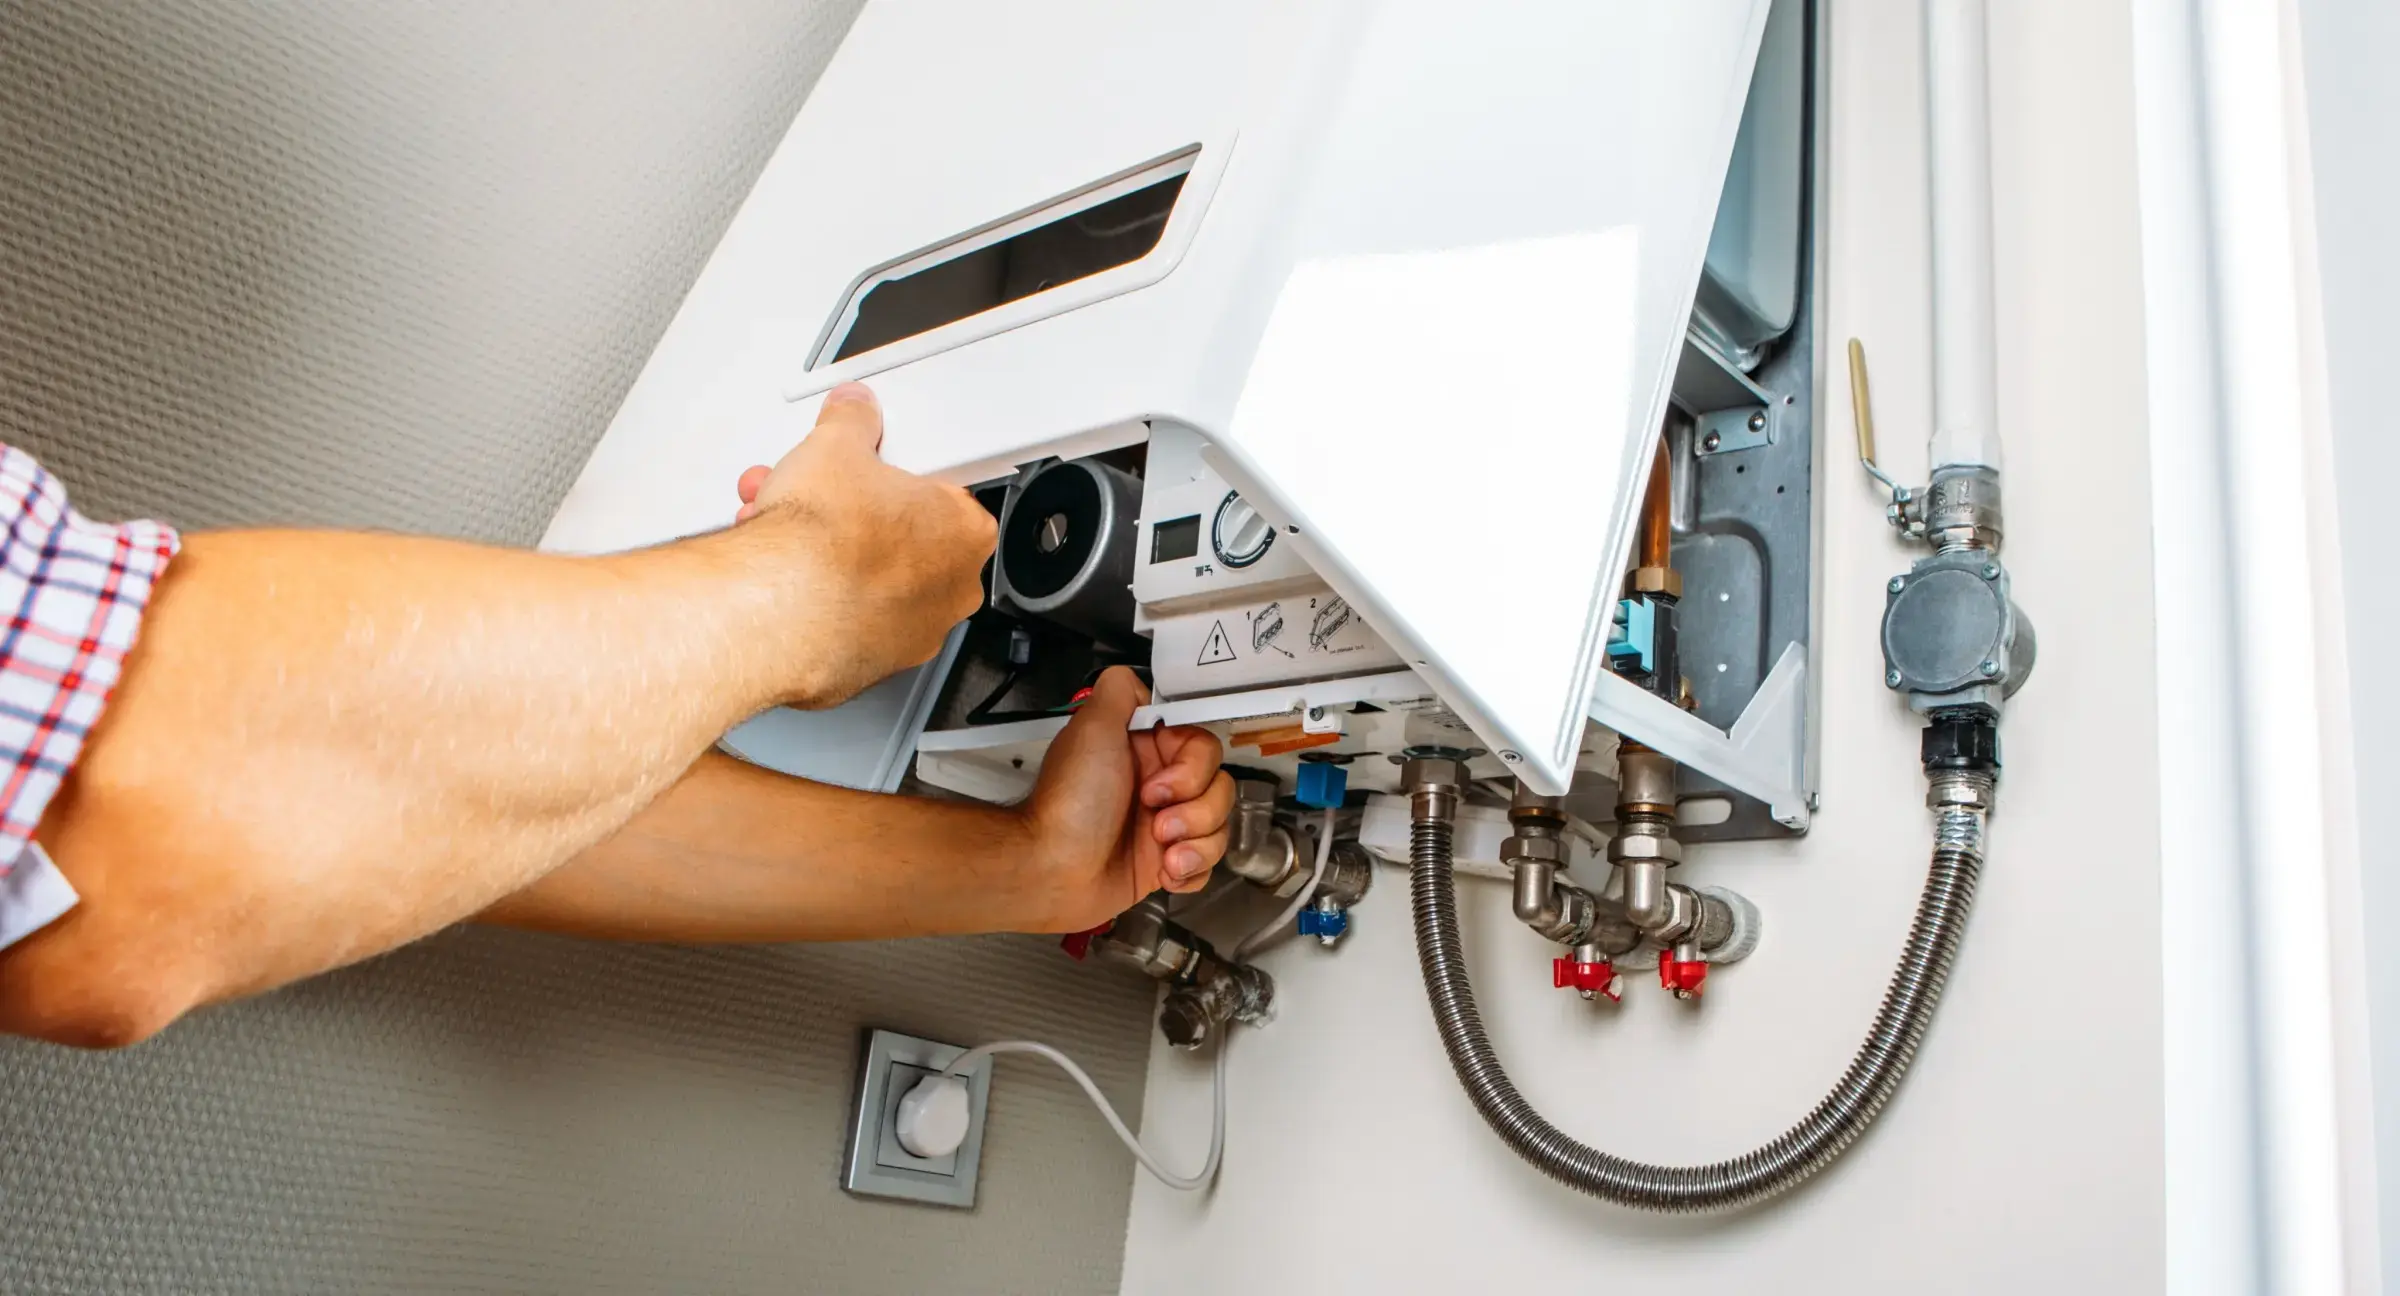 What Are Some Common Water Heater Problems?